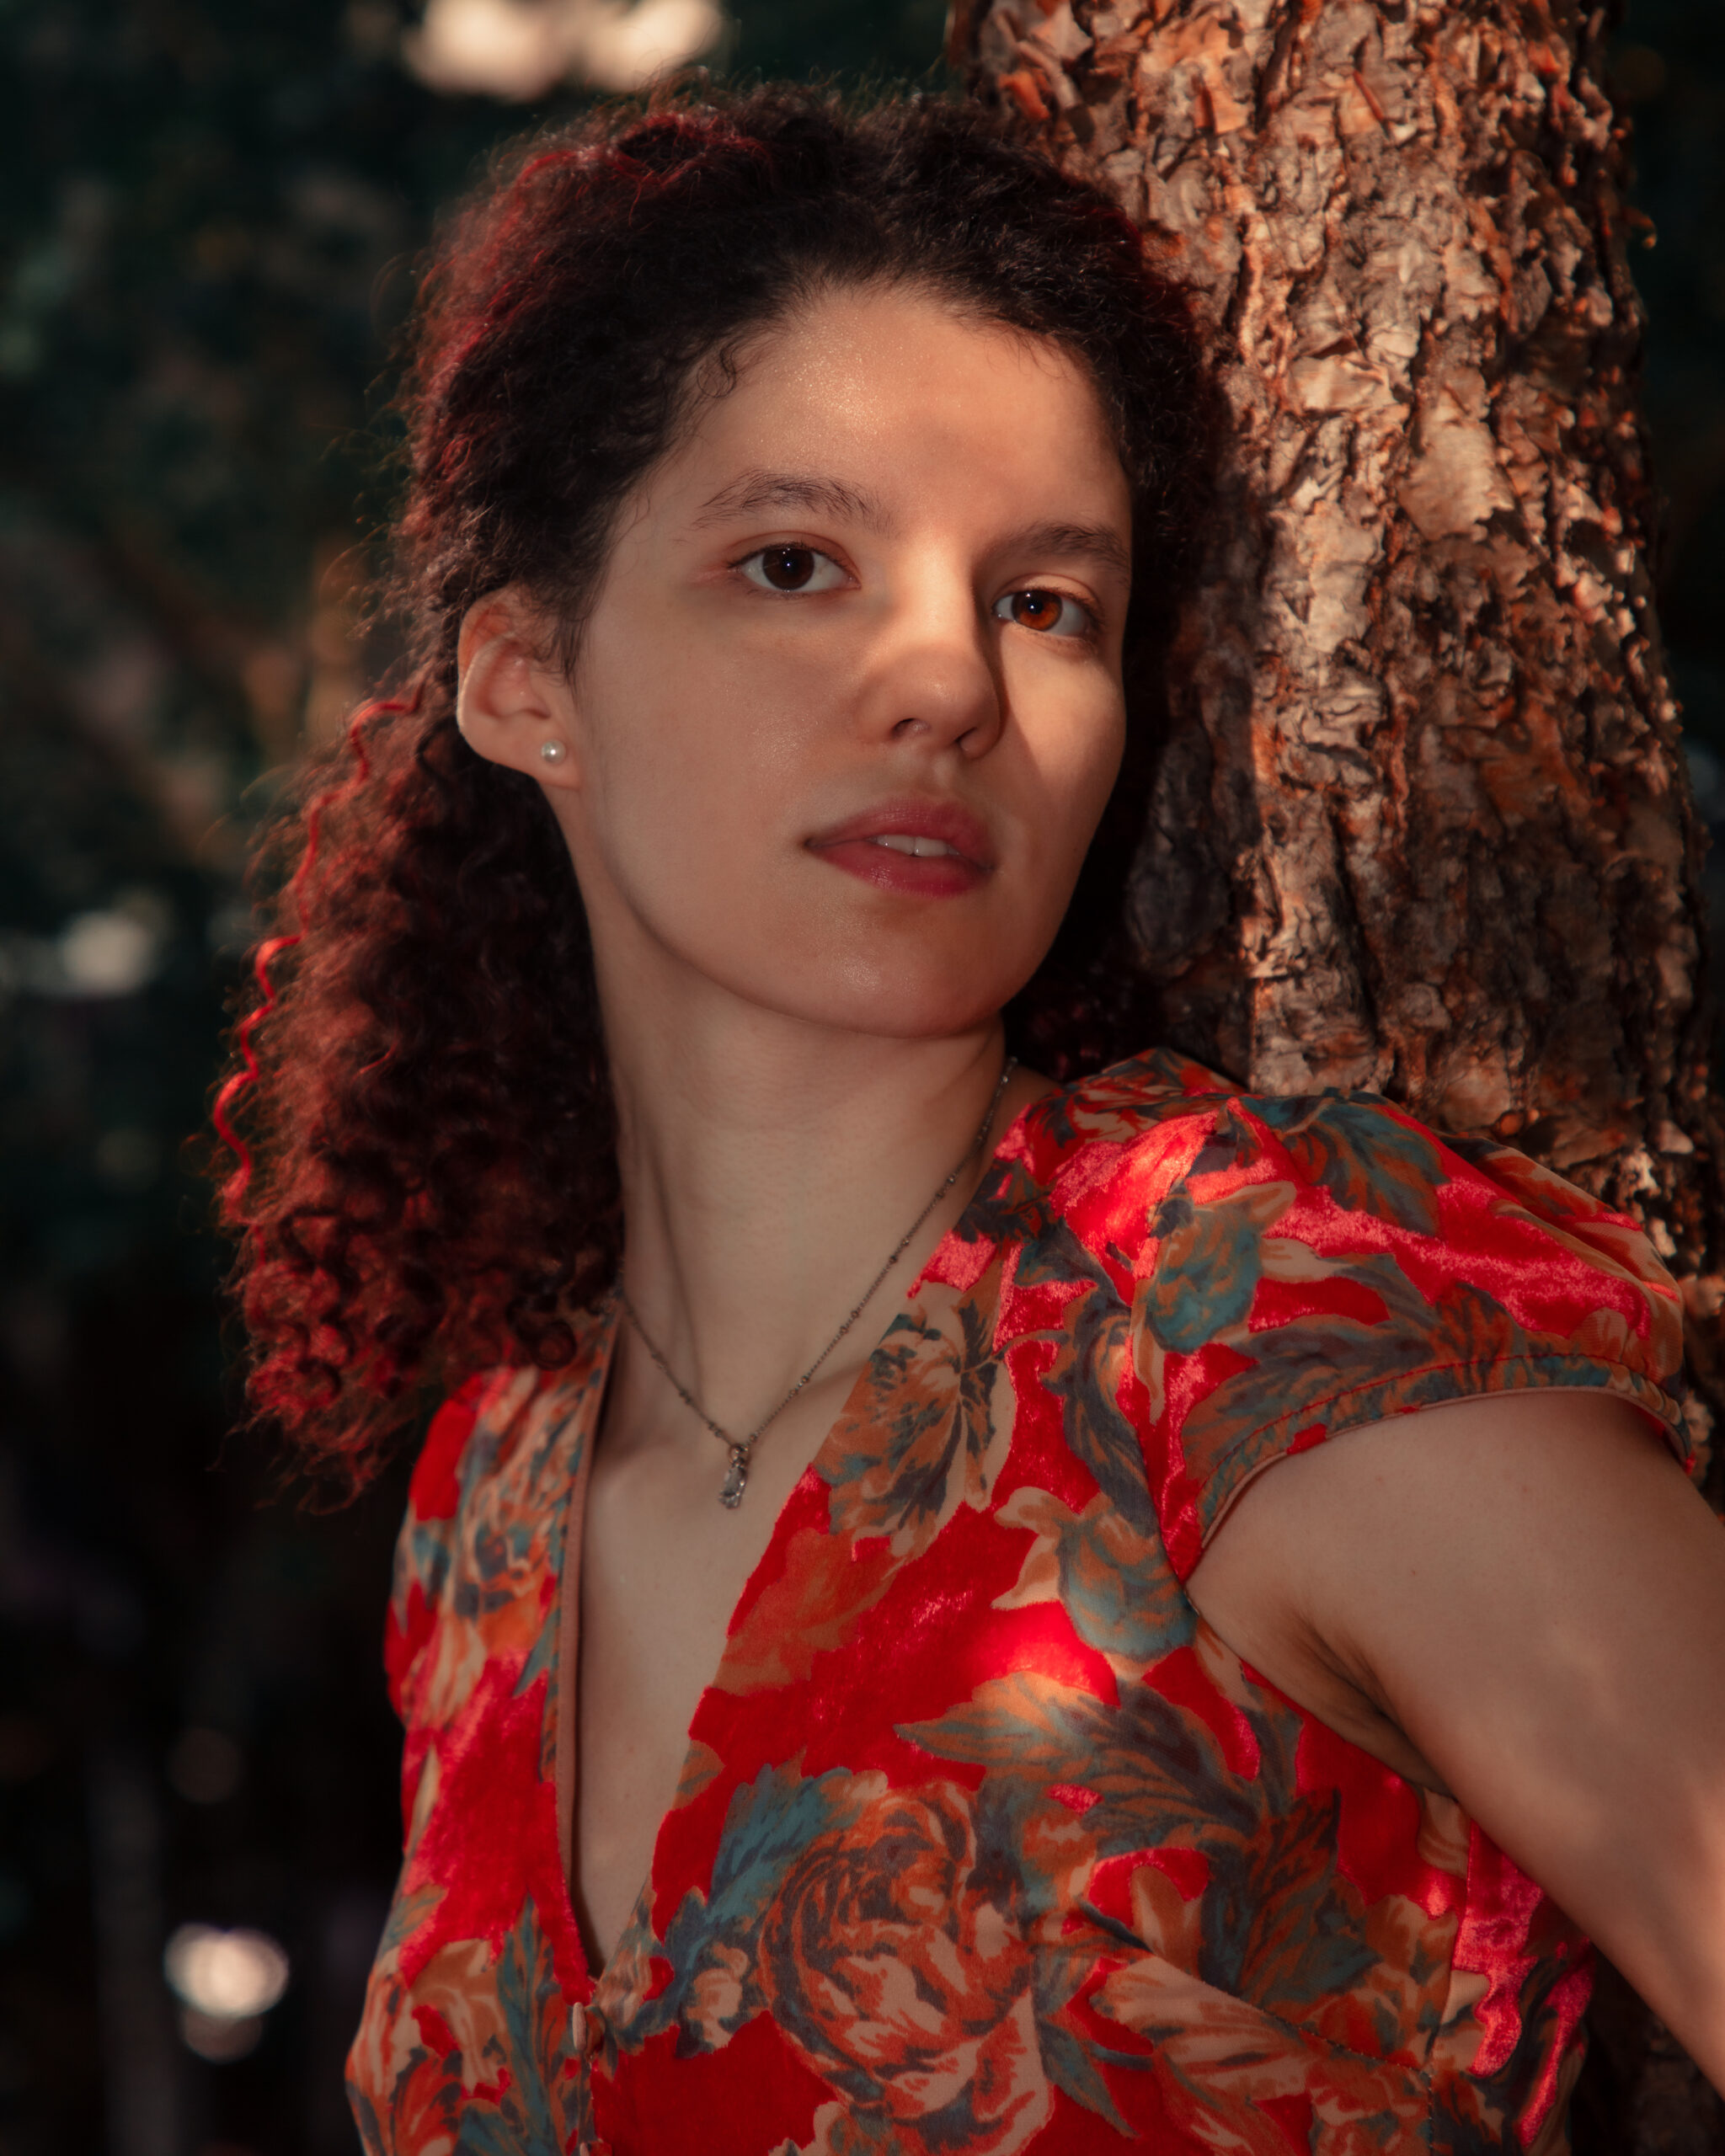 The image is a portrait of a woman with shoulder-length brown curly hair leaning against a tree. She has a neutral expression and is looking slightly away from the camera. She is wearing a red floral top with a V-neckline and a delicate necklace. The lighting is warm, casting soft shadows on her face, and the tree bark provides a textured backdrop. One of her eyes is in shadow, the other is brightly lit up by the sun, making it seem as if she has heterochromia. The overall tone of the image is warm with a focus on natural colors